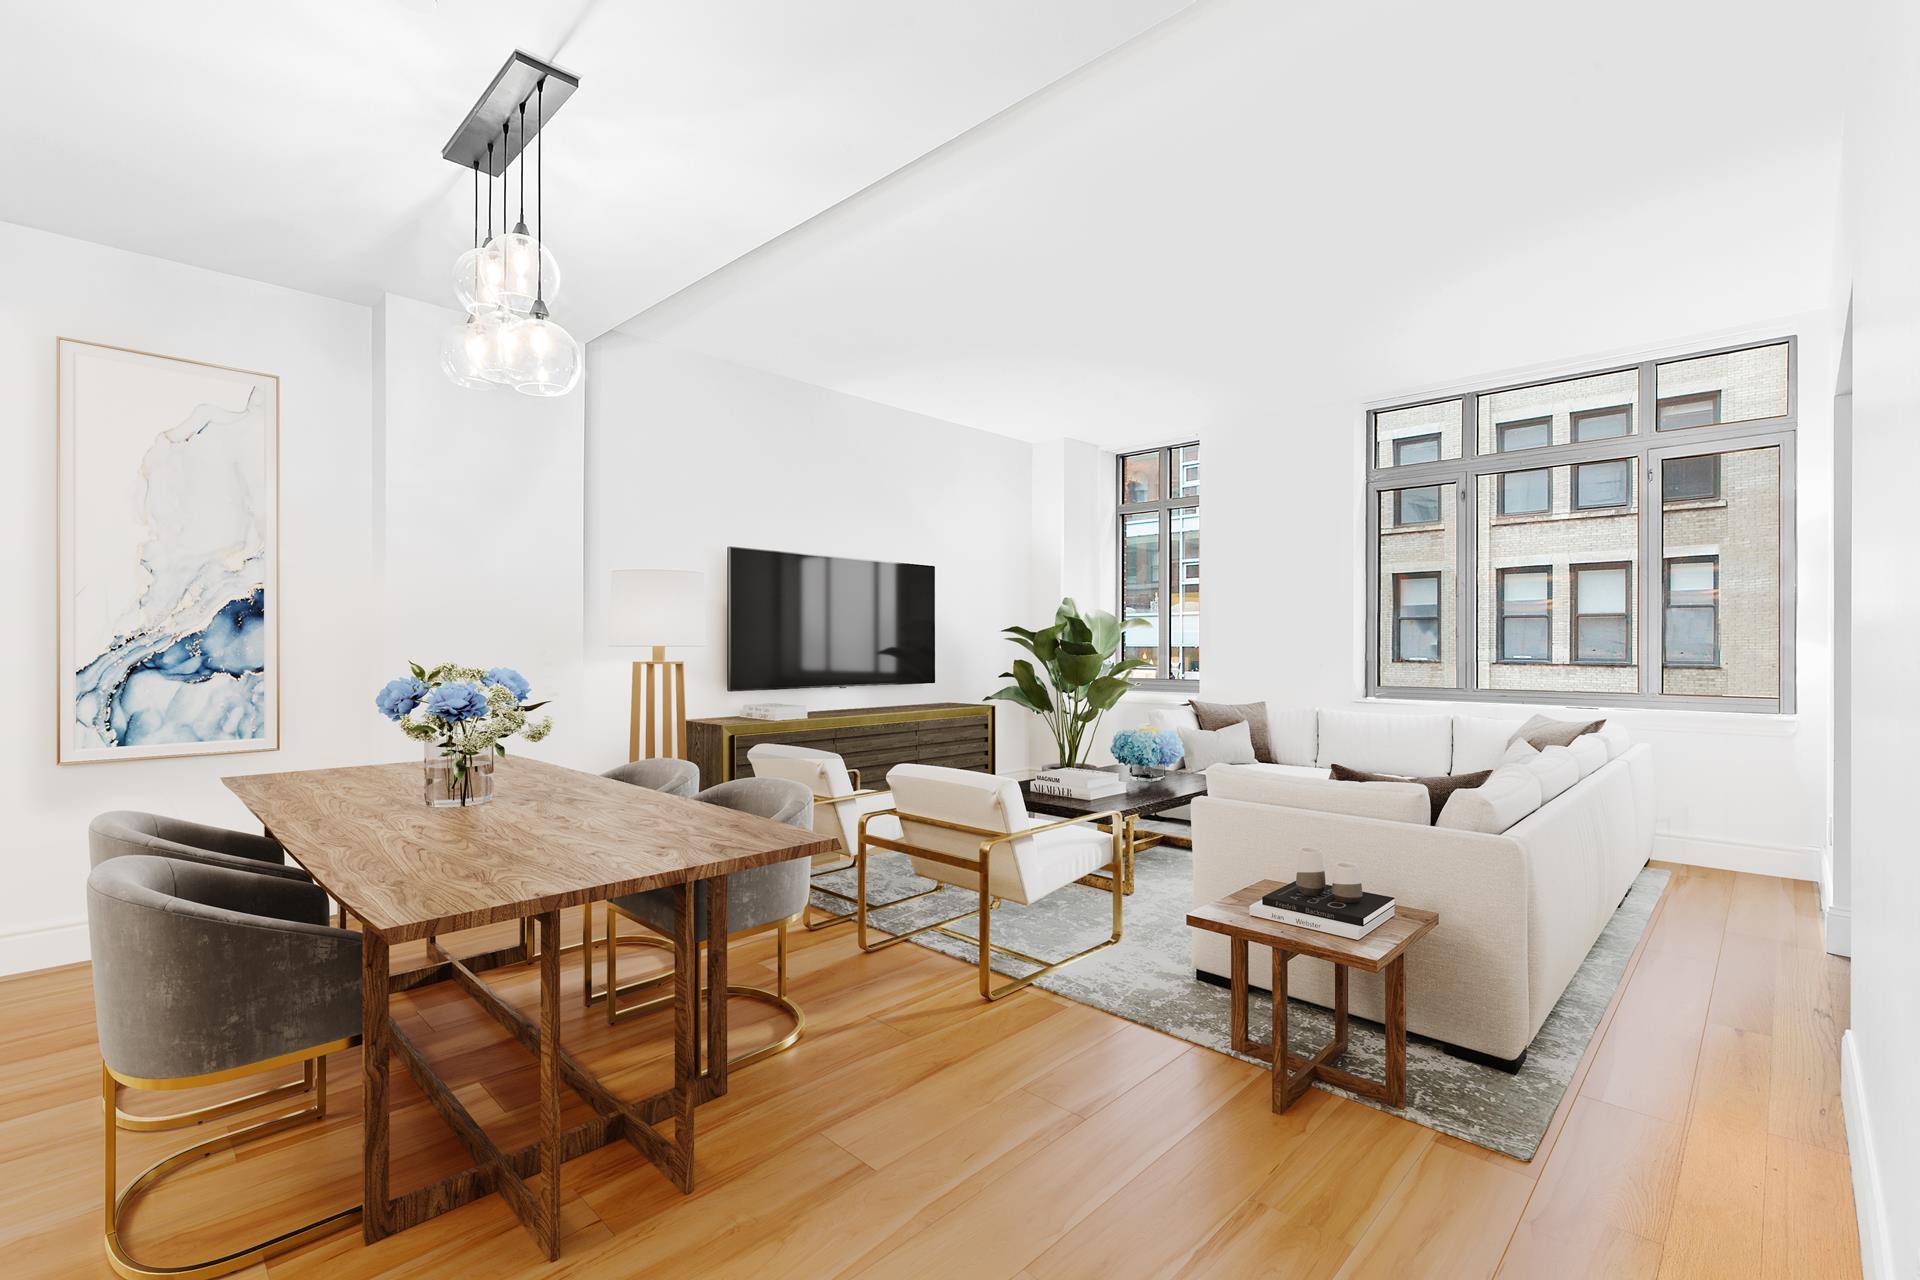 Totaling nearly 1, 700 square feet, apartment 5B is a spacious three bedroom three bathroom condo in the heart of Chelsea, with Northern and Southern exposures.